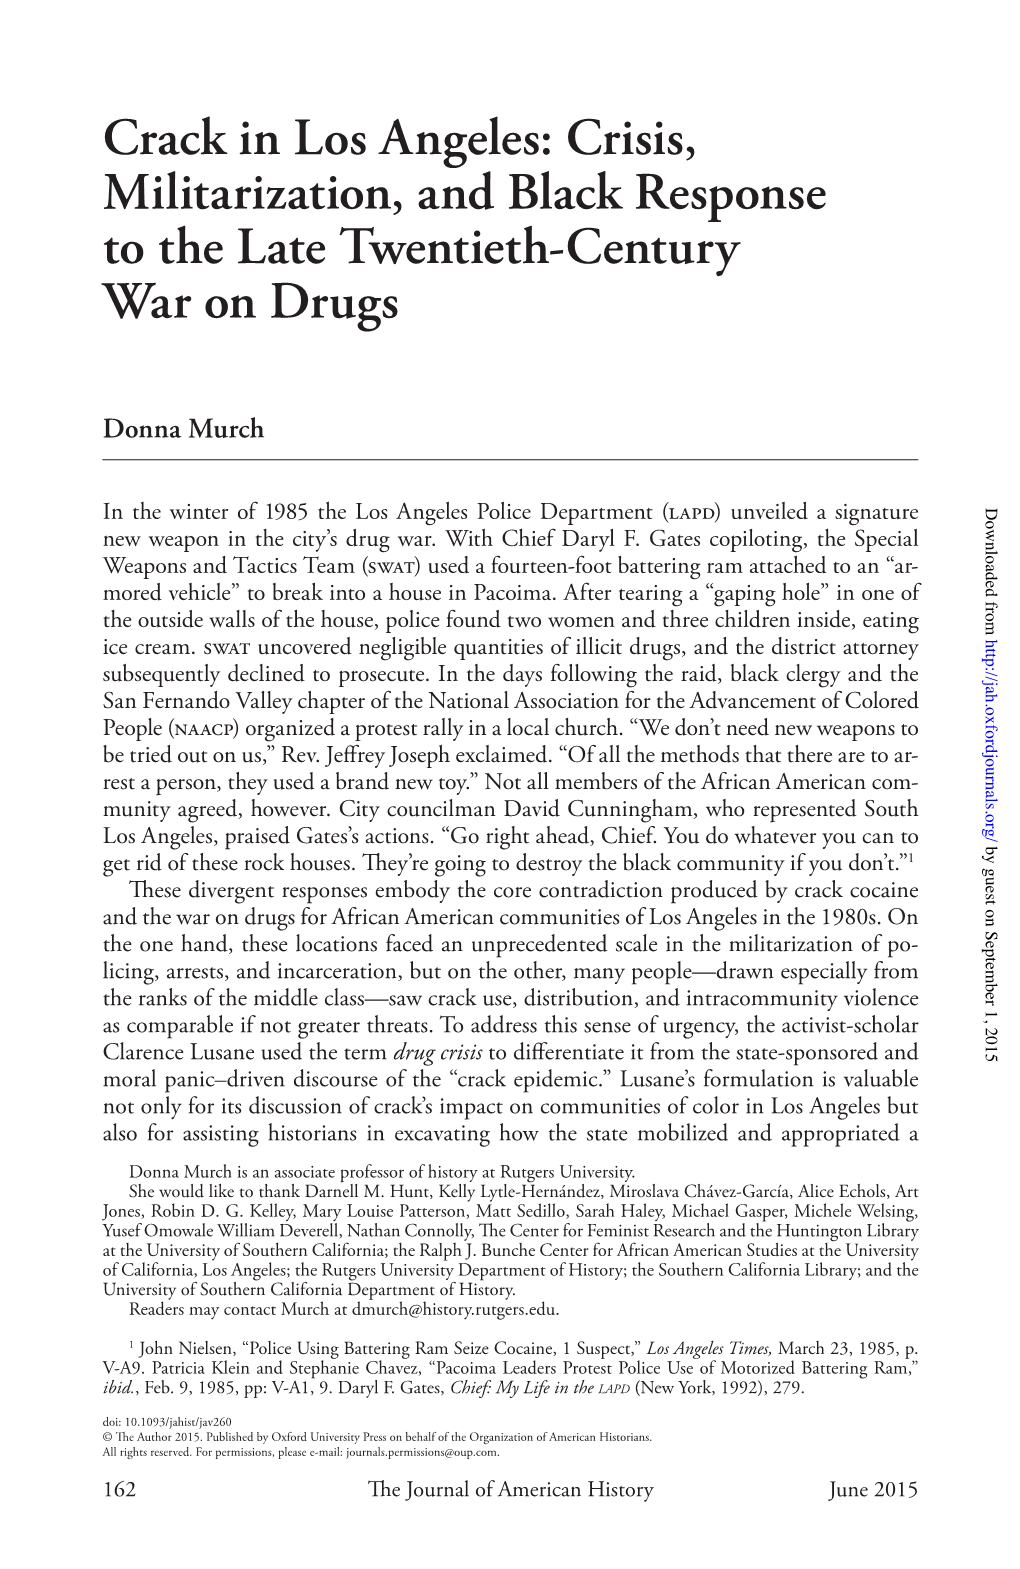 Crack in Los Angeles: Crisis, Militarization, and Black Response to the Late Twentieth-Century War on Drugs